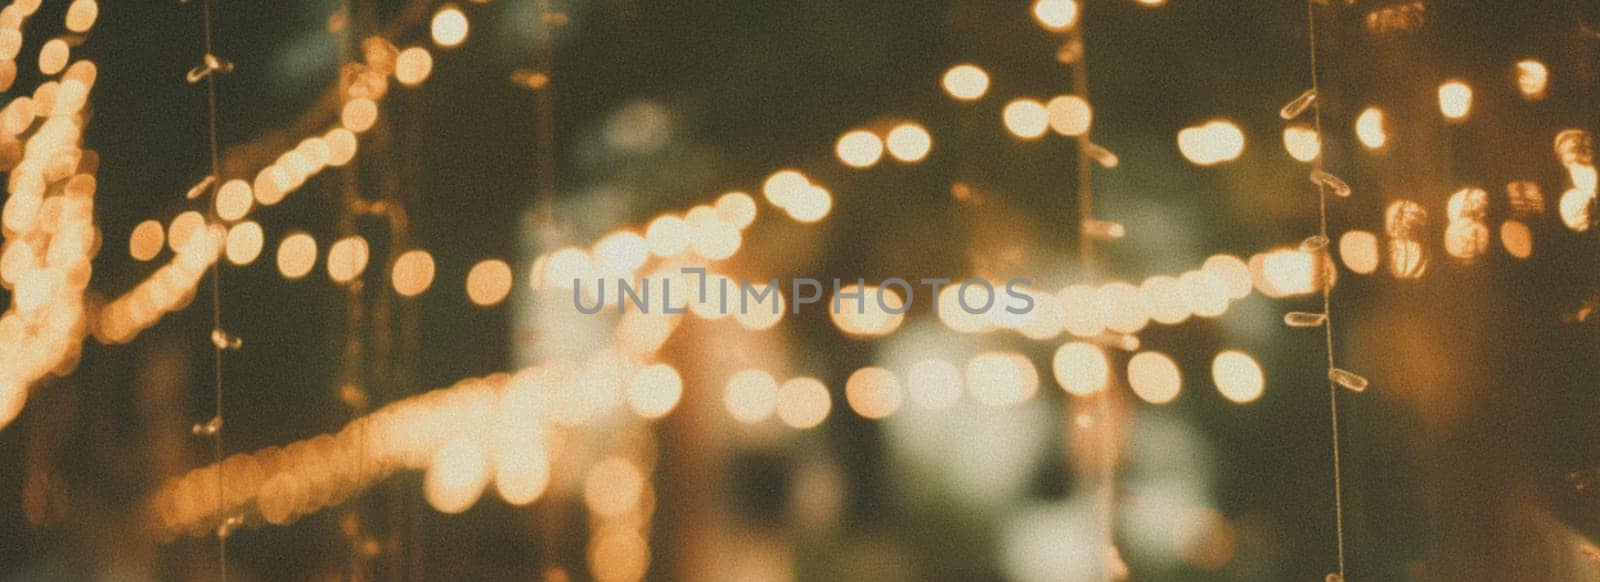 Abstract Blurred image of Night Festival in garden with bokeh for background usage. Concept of vintage tones by FokasuArt